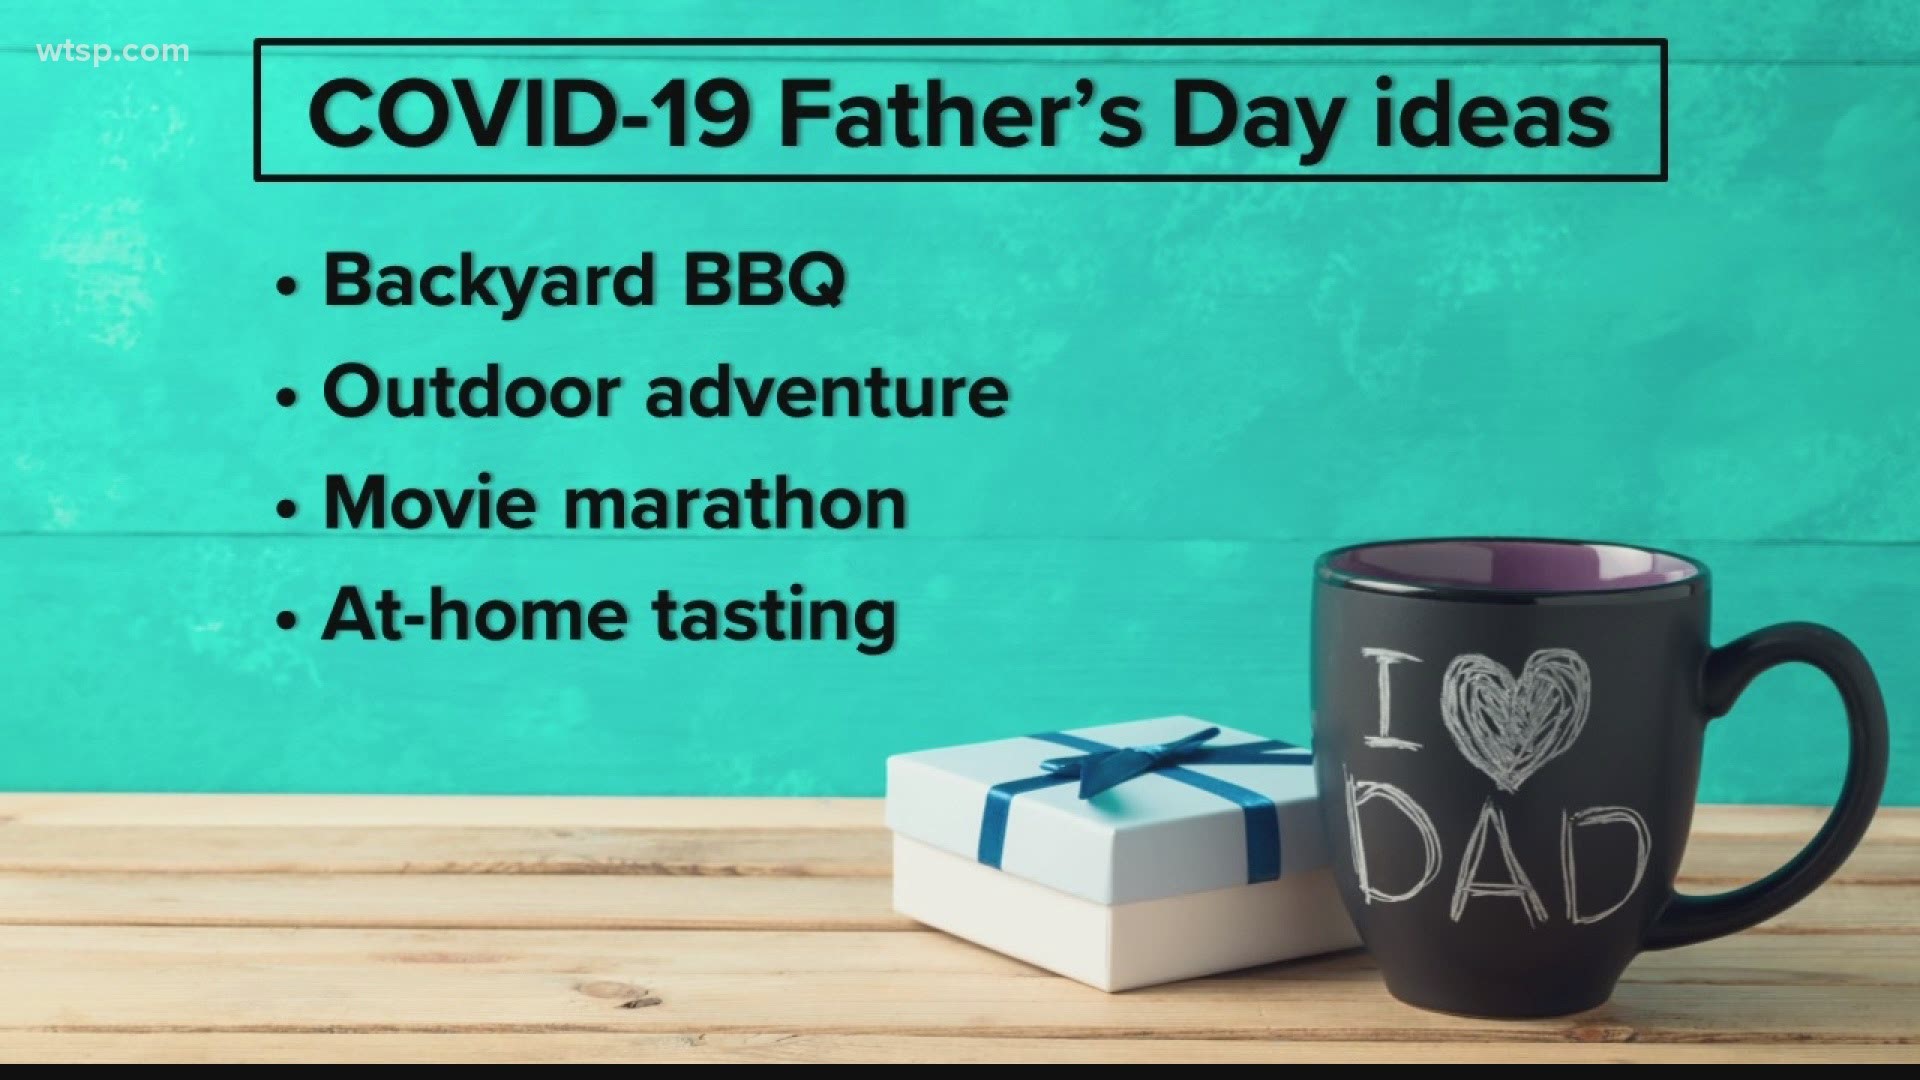 As COVID-19 cases continue to spike in Florida, we're giving you ways to safely celebrate dad this weekend.